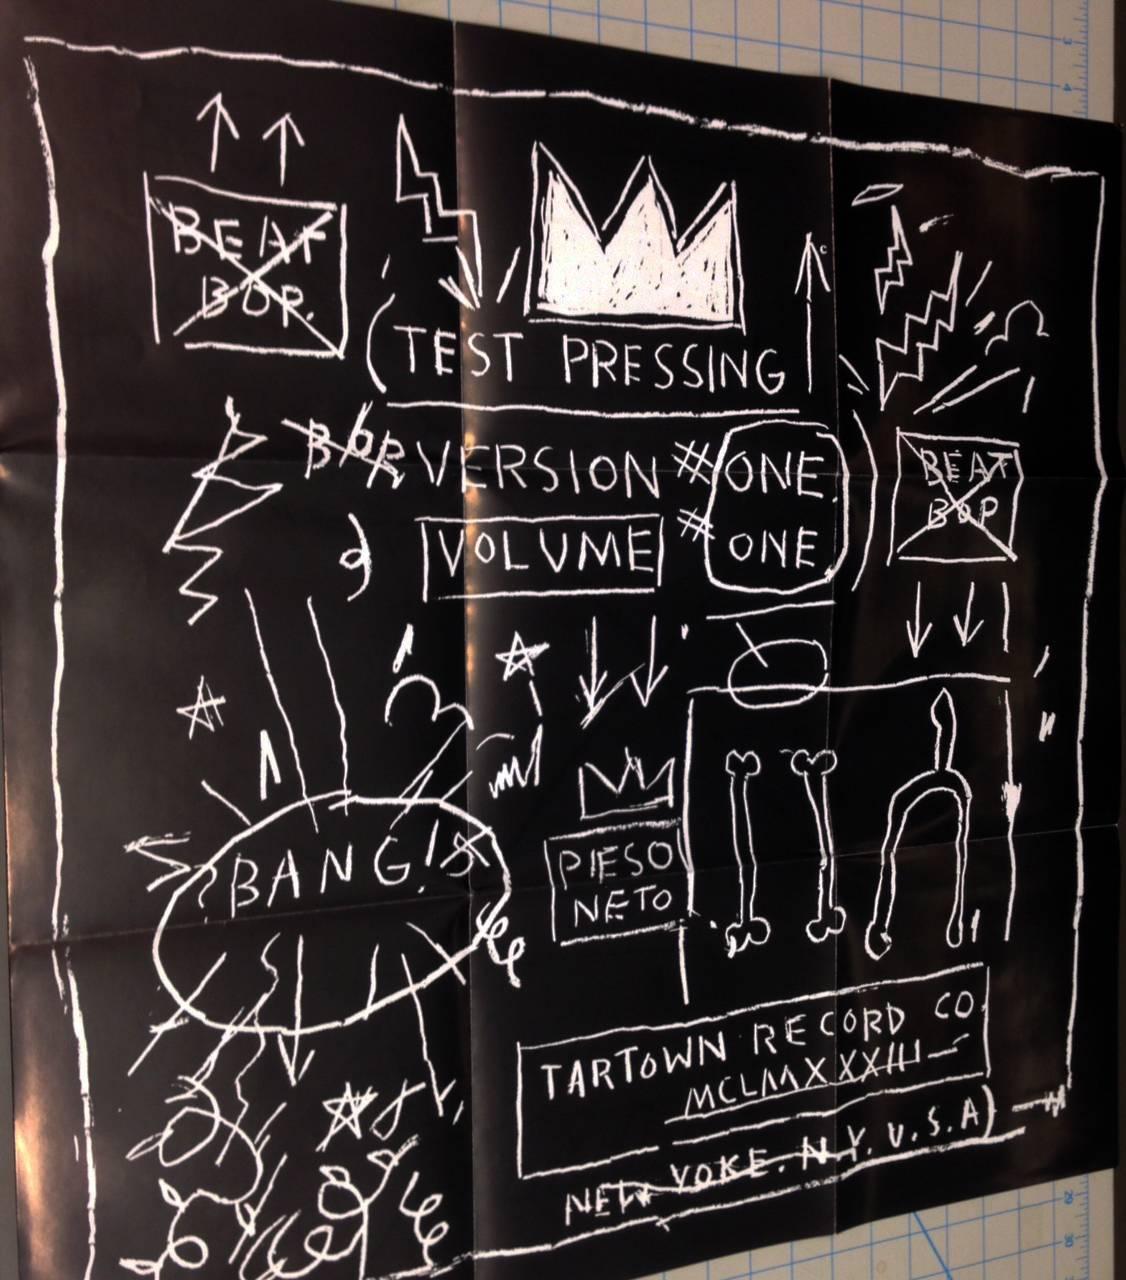 Basquiat Beat Bop Record Art and Poster  2